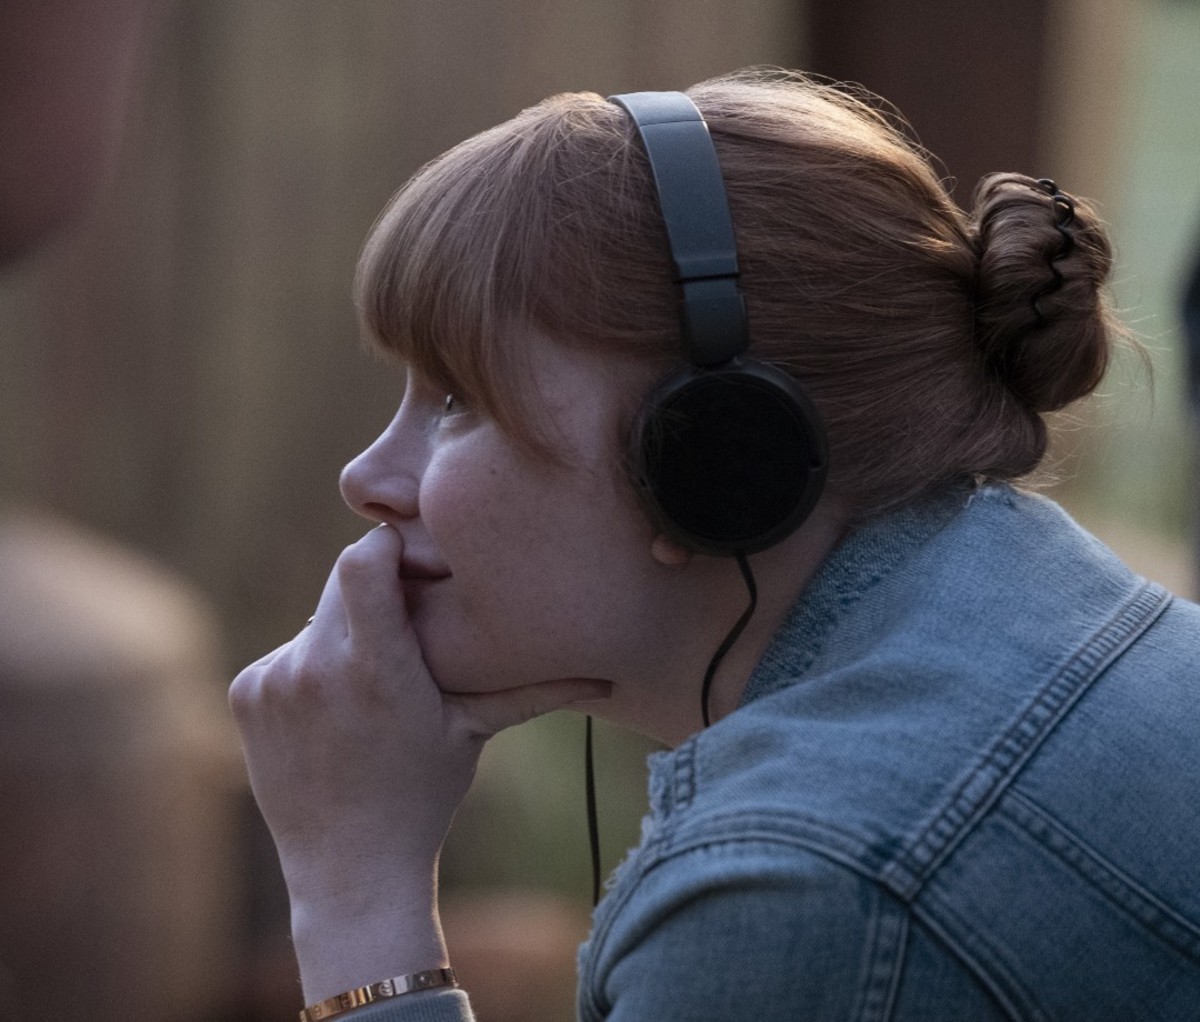 Bryce Dallas Howard on the set of THE MANDALORIAN, exclusively on Disney+